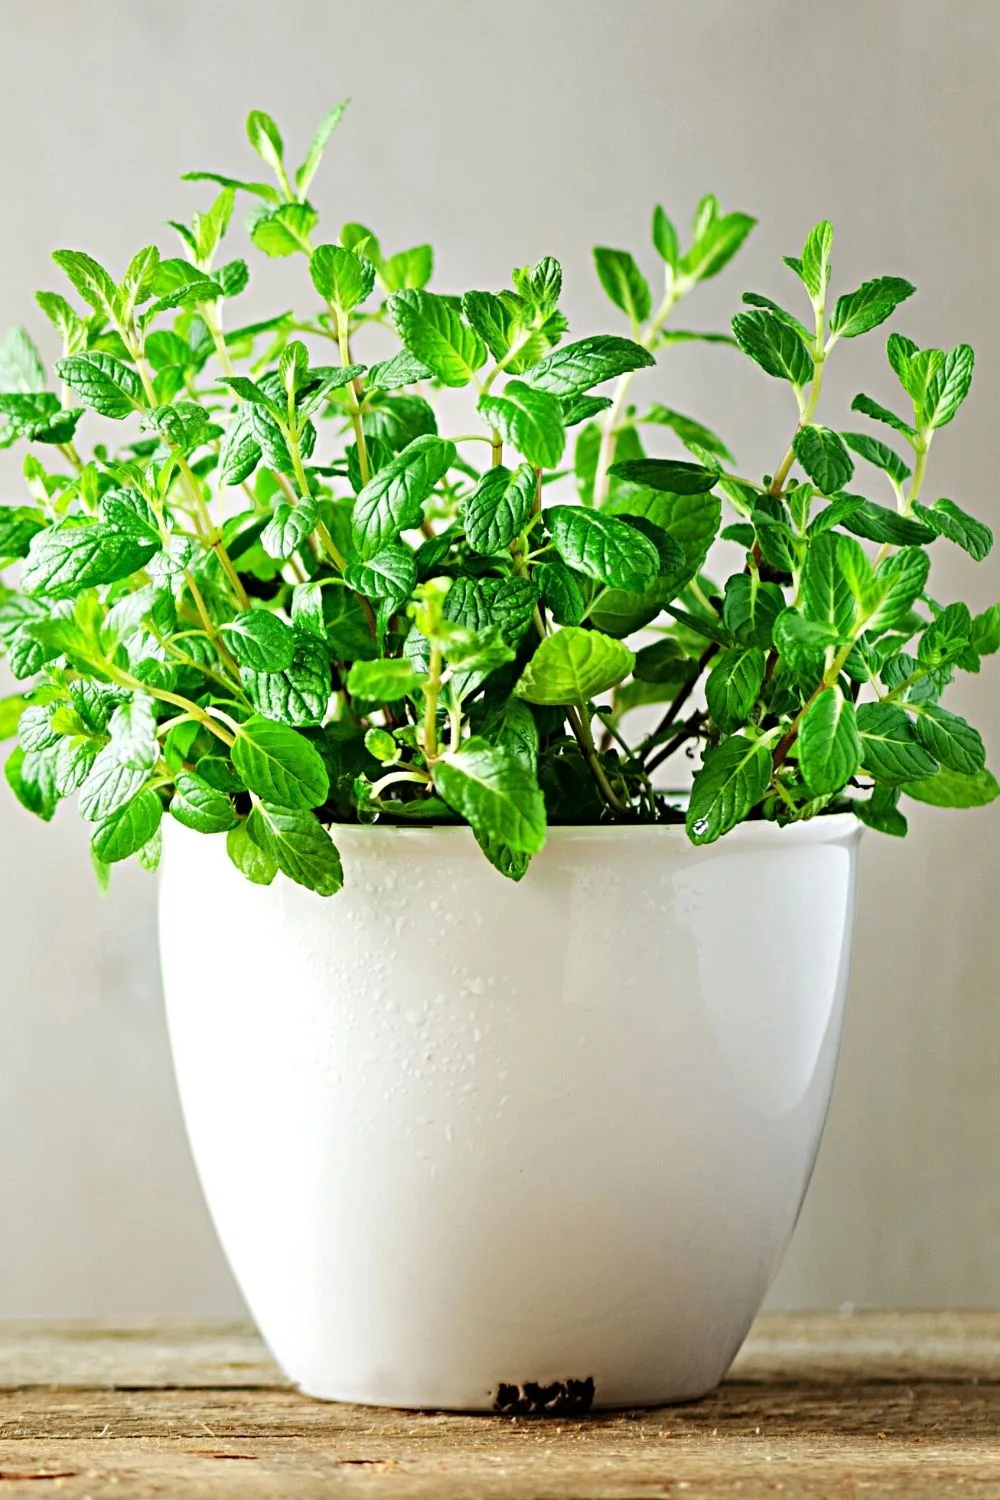 An aromatic, warm-weather herb, Basil will thrive when planted on a southwest facing garden